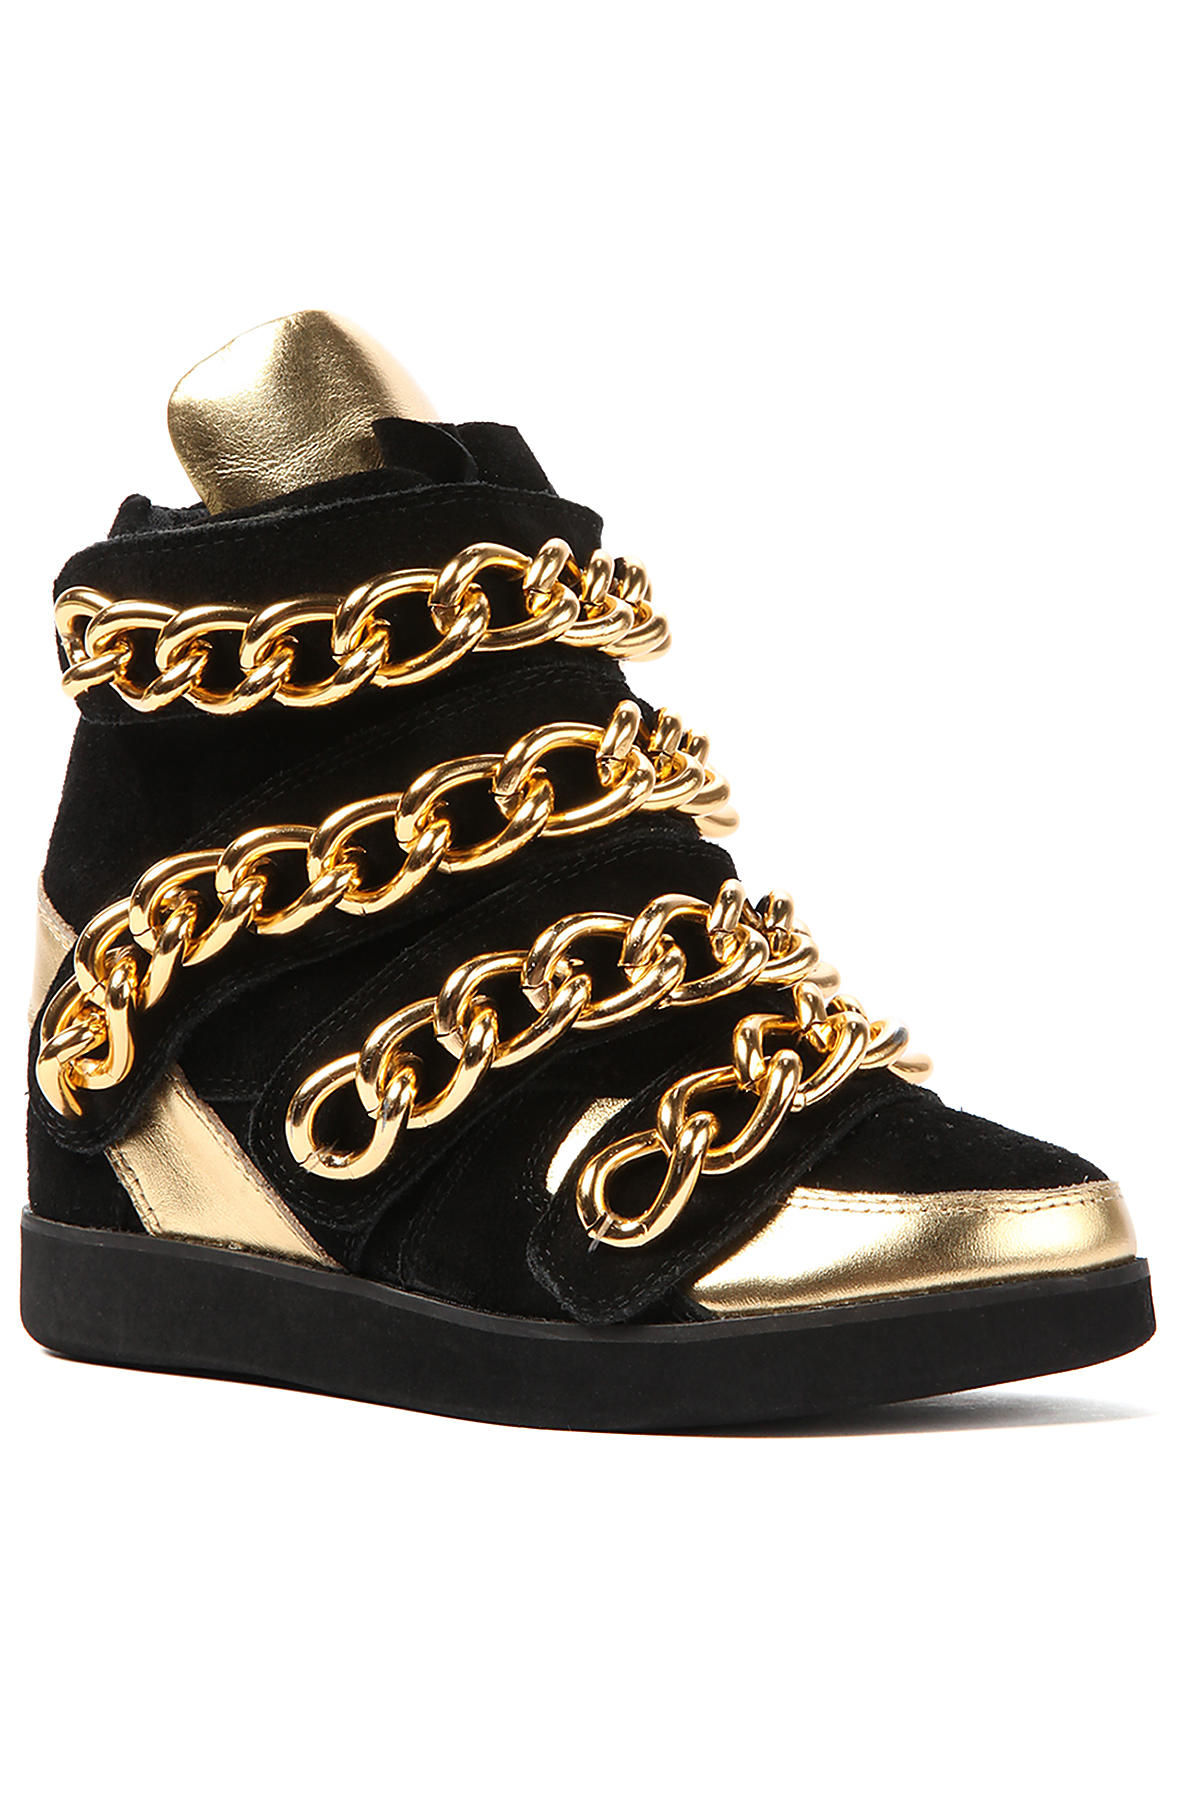 JEFFREY CAMPBELL Almost Chain Sneaker in Suede and Gold ALMOST-CHAIN-BLK-GLD Shiekh